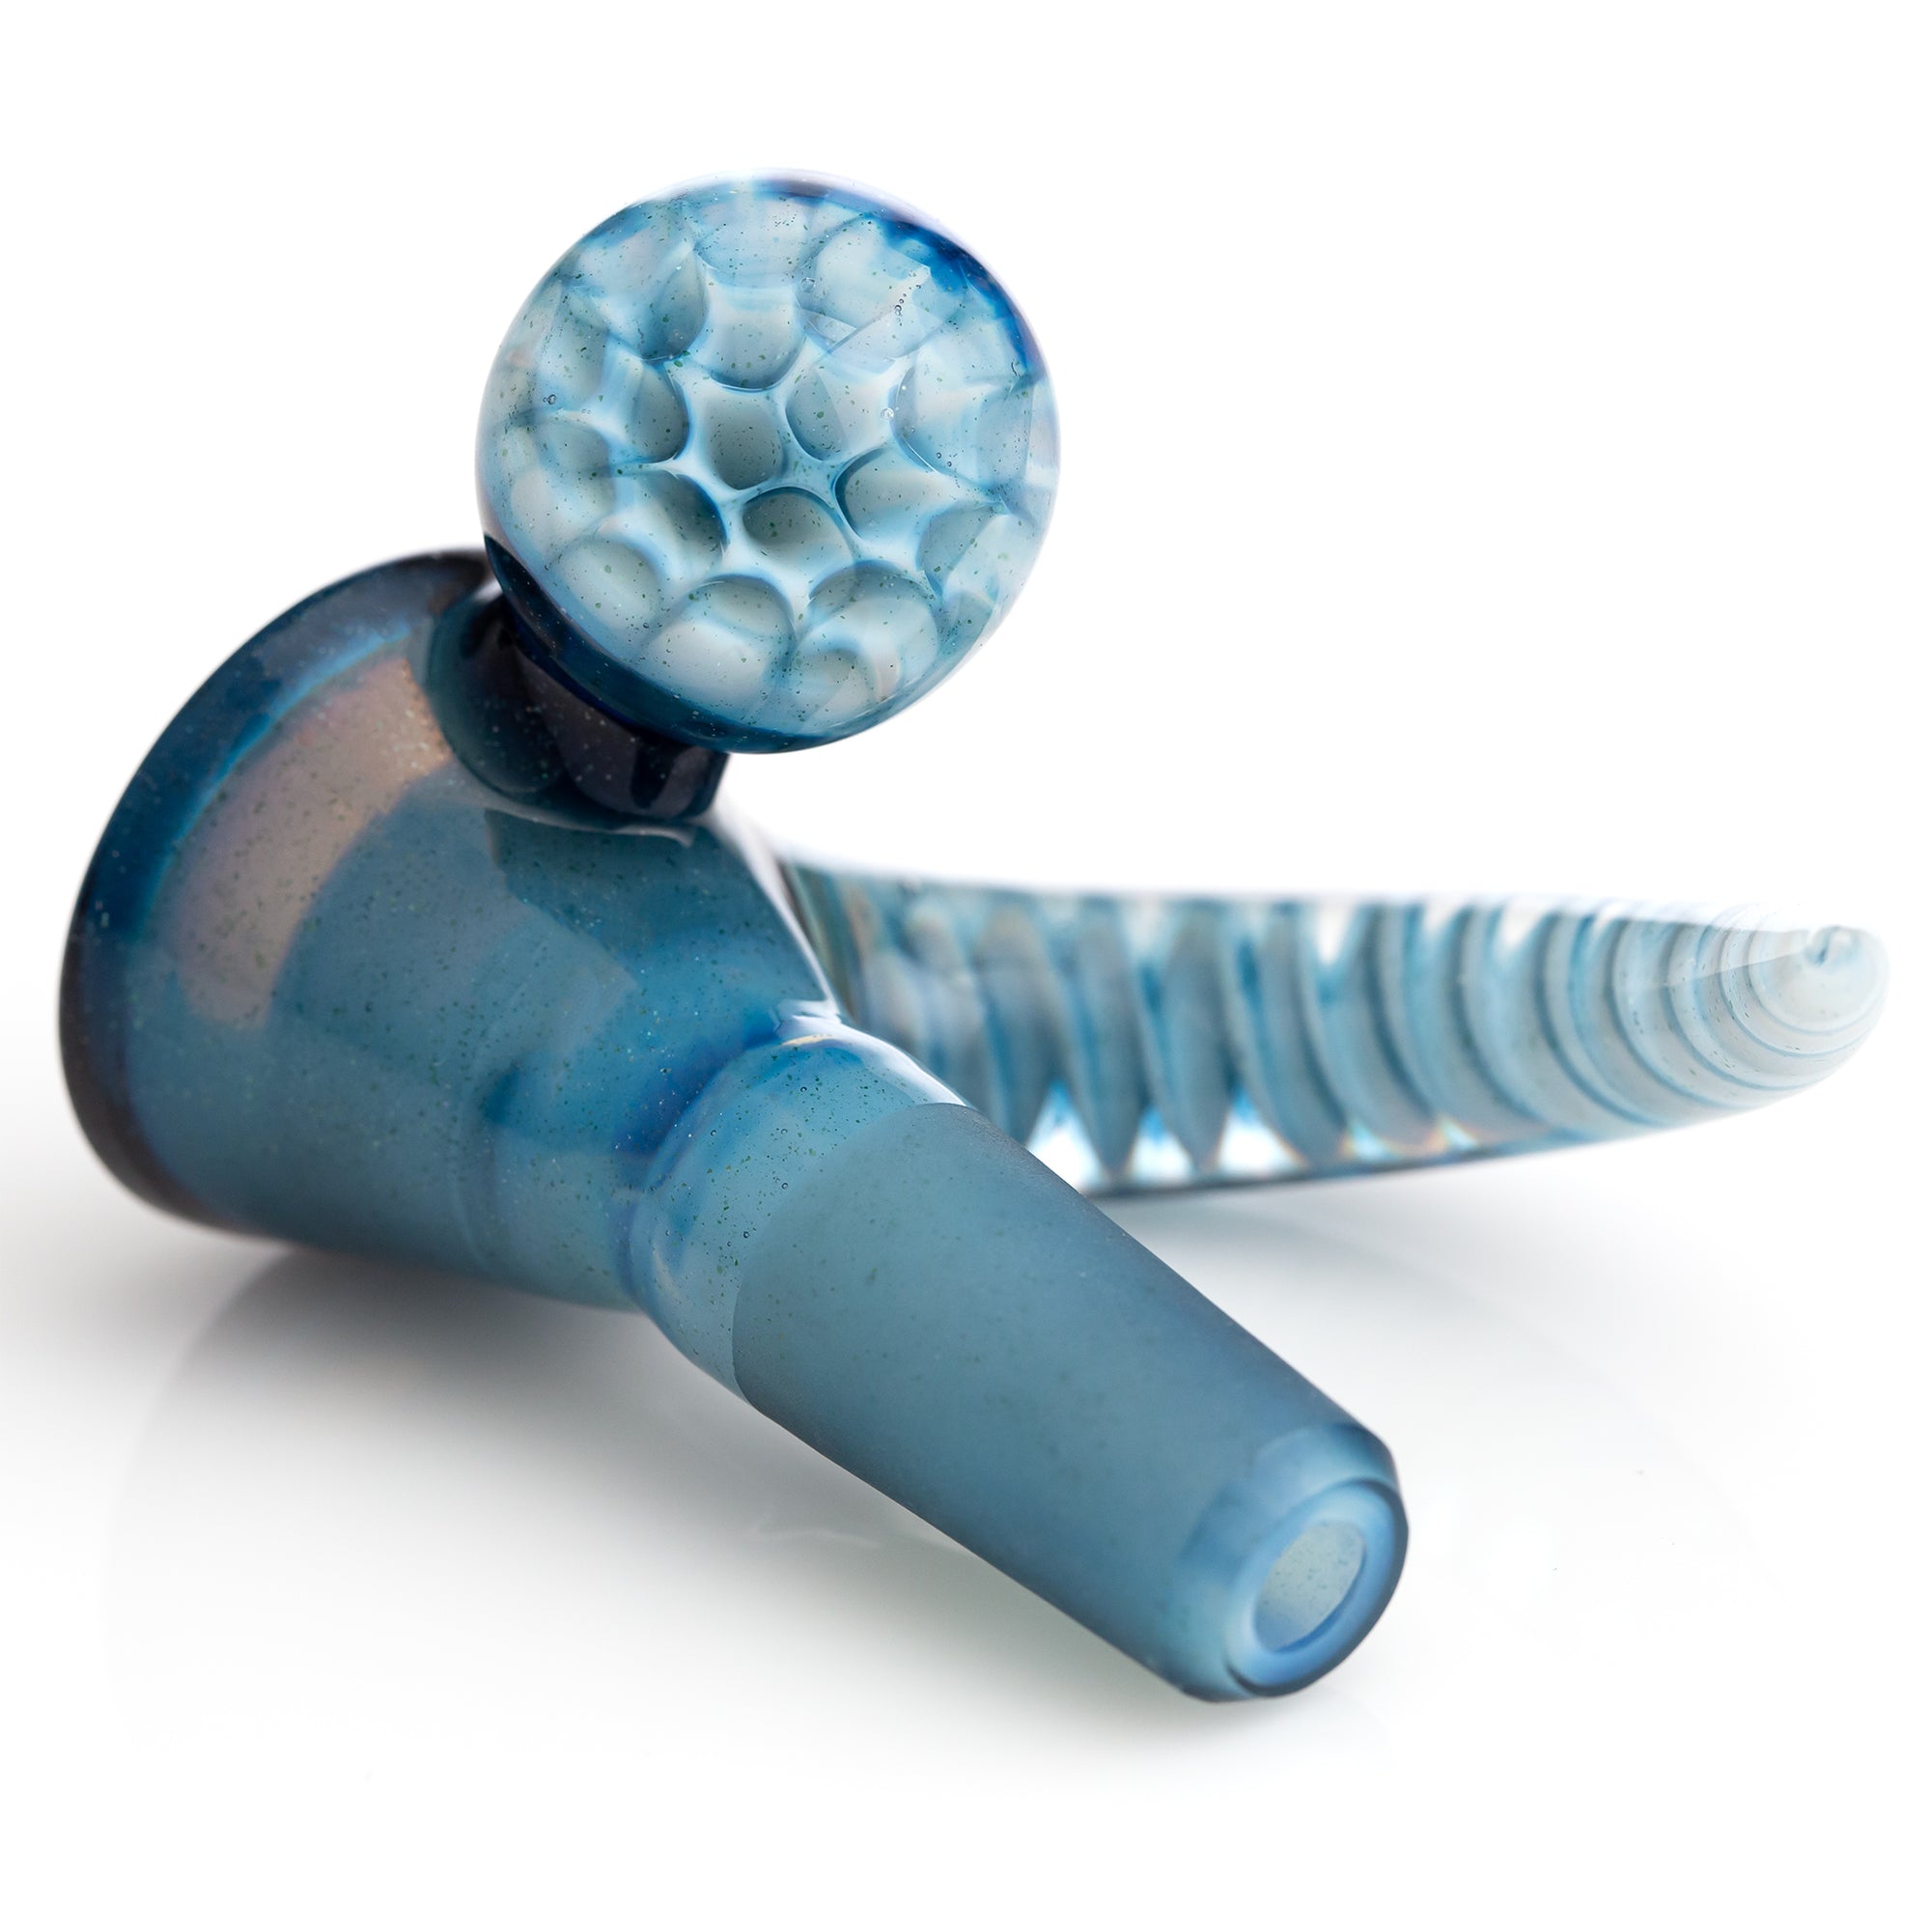 Chase Adams 4 Hole Slide with Horn and Marble (14mm) - Blue Stardust over Ghost